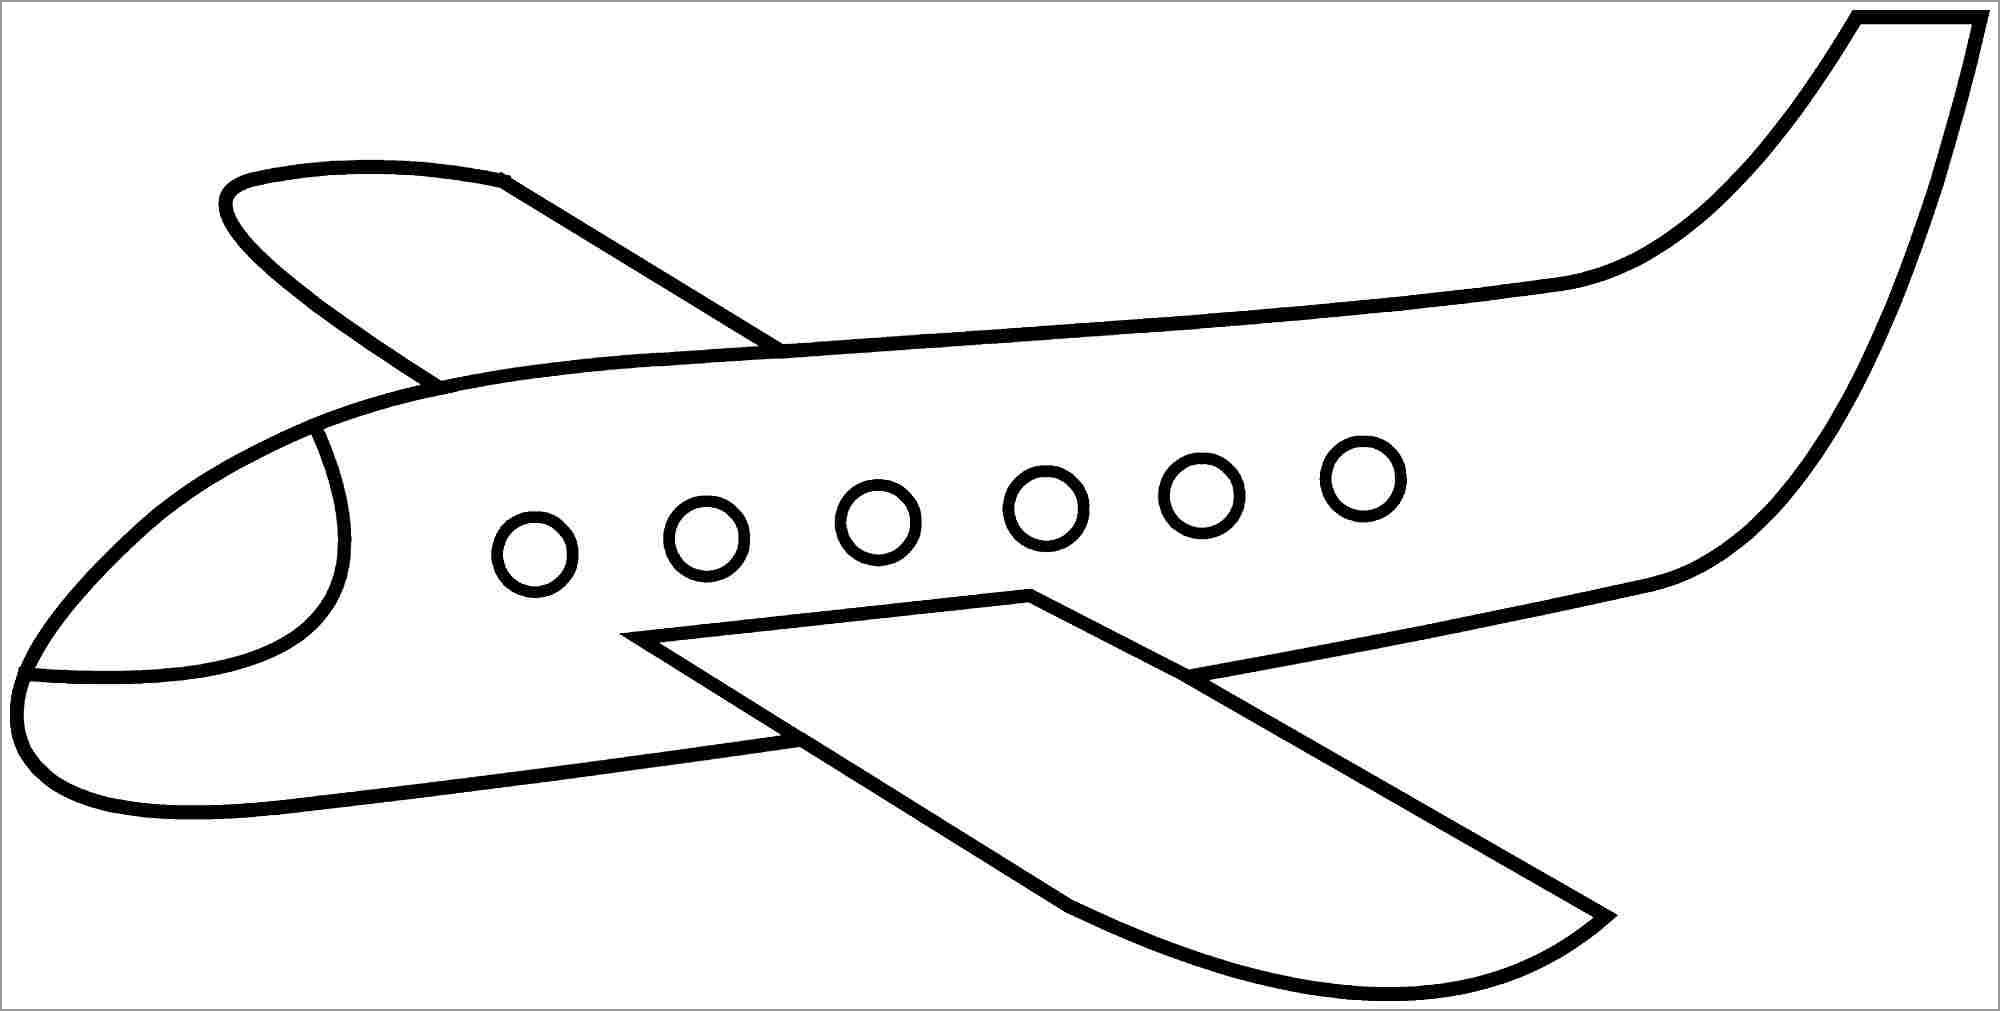 Simple Airplane Coloring Page for Kids